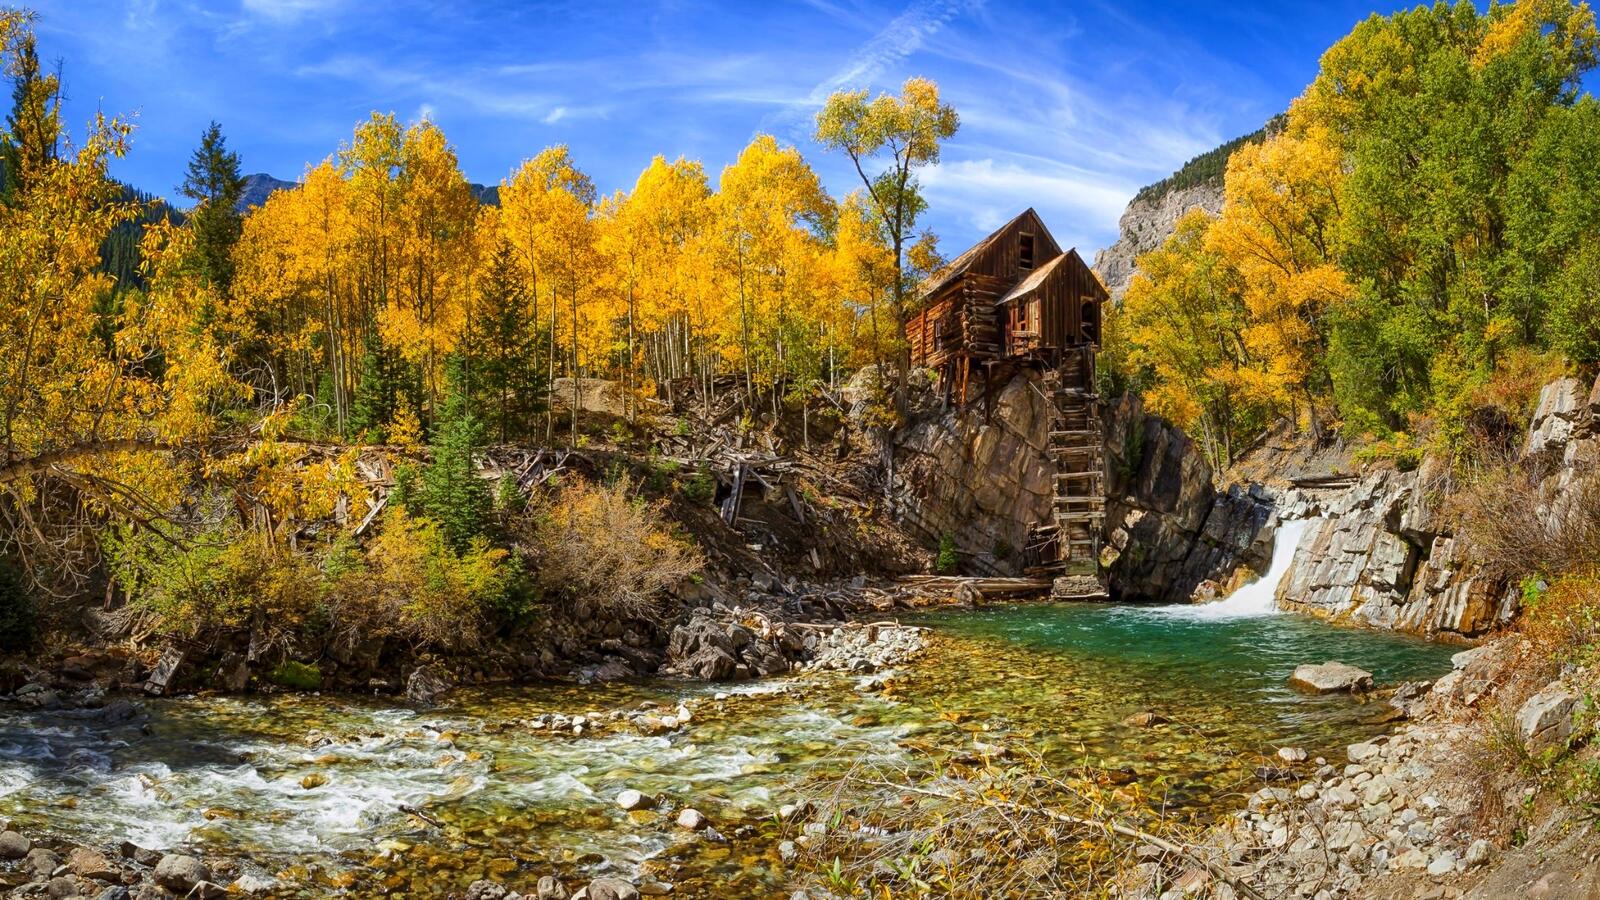 Free photo Wooden house on a cliff in the fall forest by the river